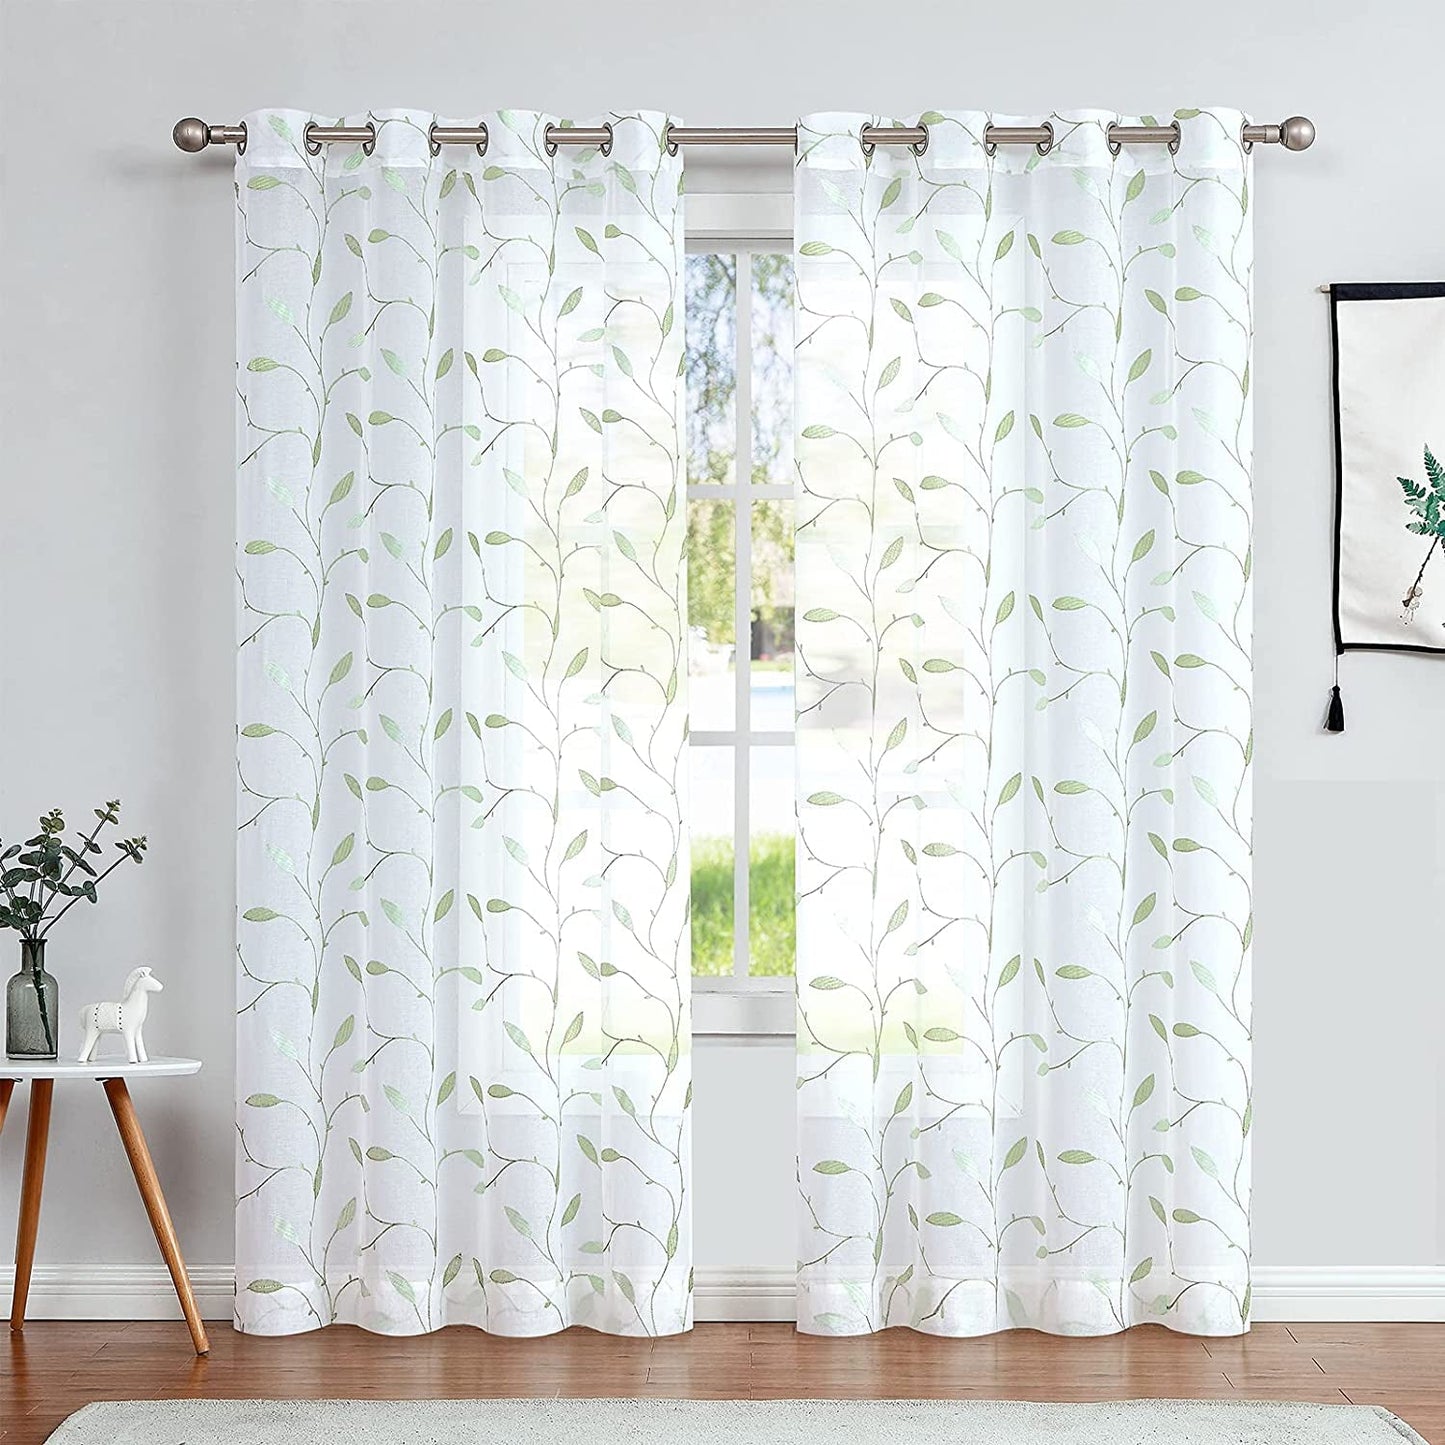 Lazzzy Sheer Curtains Embroidered Floral Leaf Voile Drapes for Bedroom Living Room Grommet Top Window Treatments 2 Panels 84 Inches Green on White